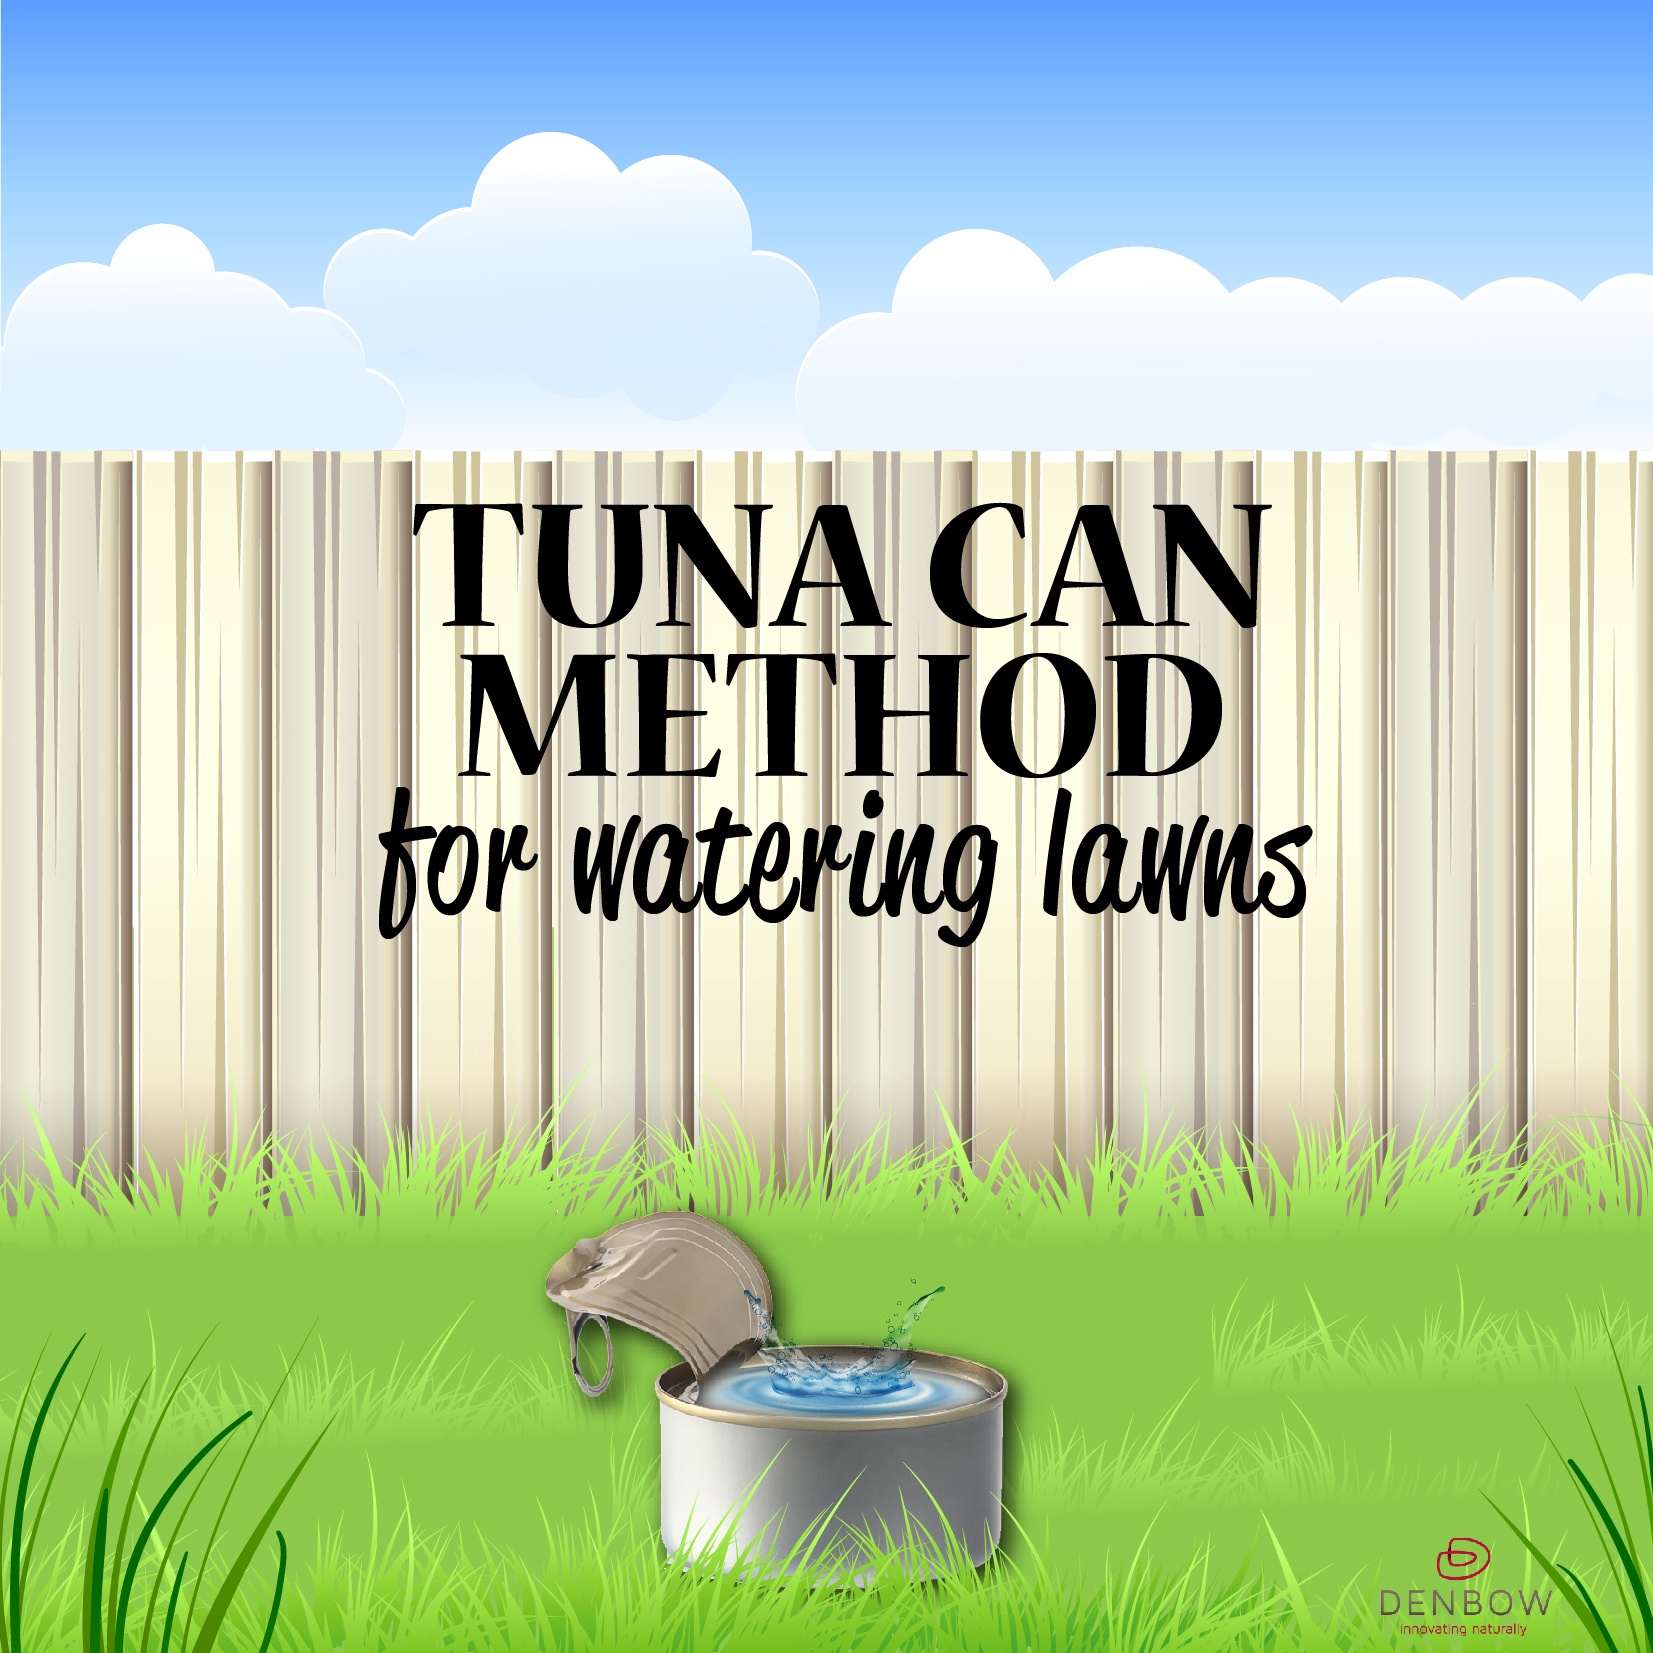 Tuna Cans + Water = Lawn!